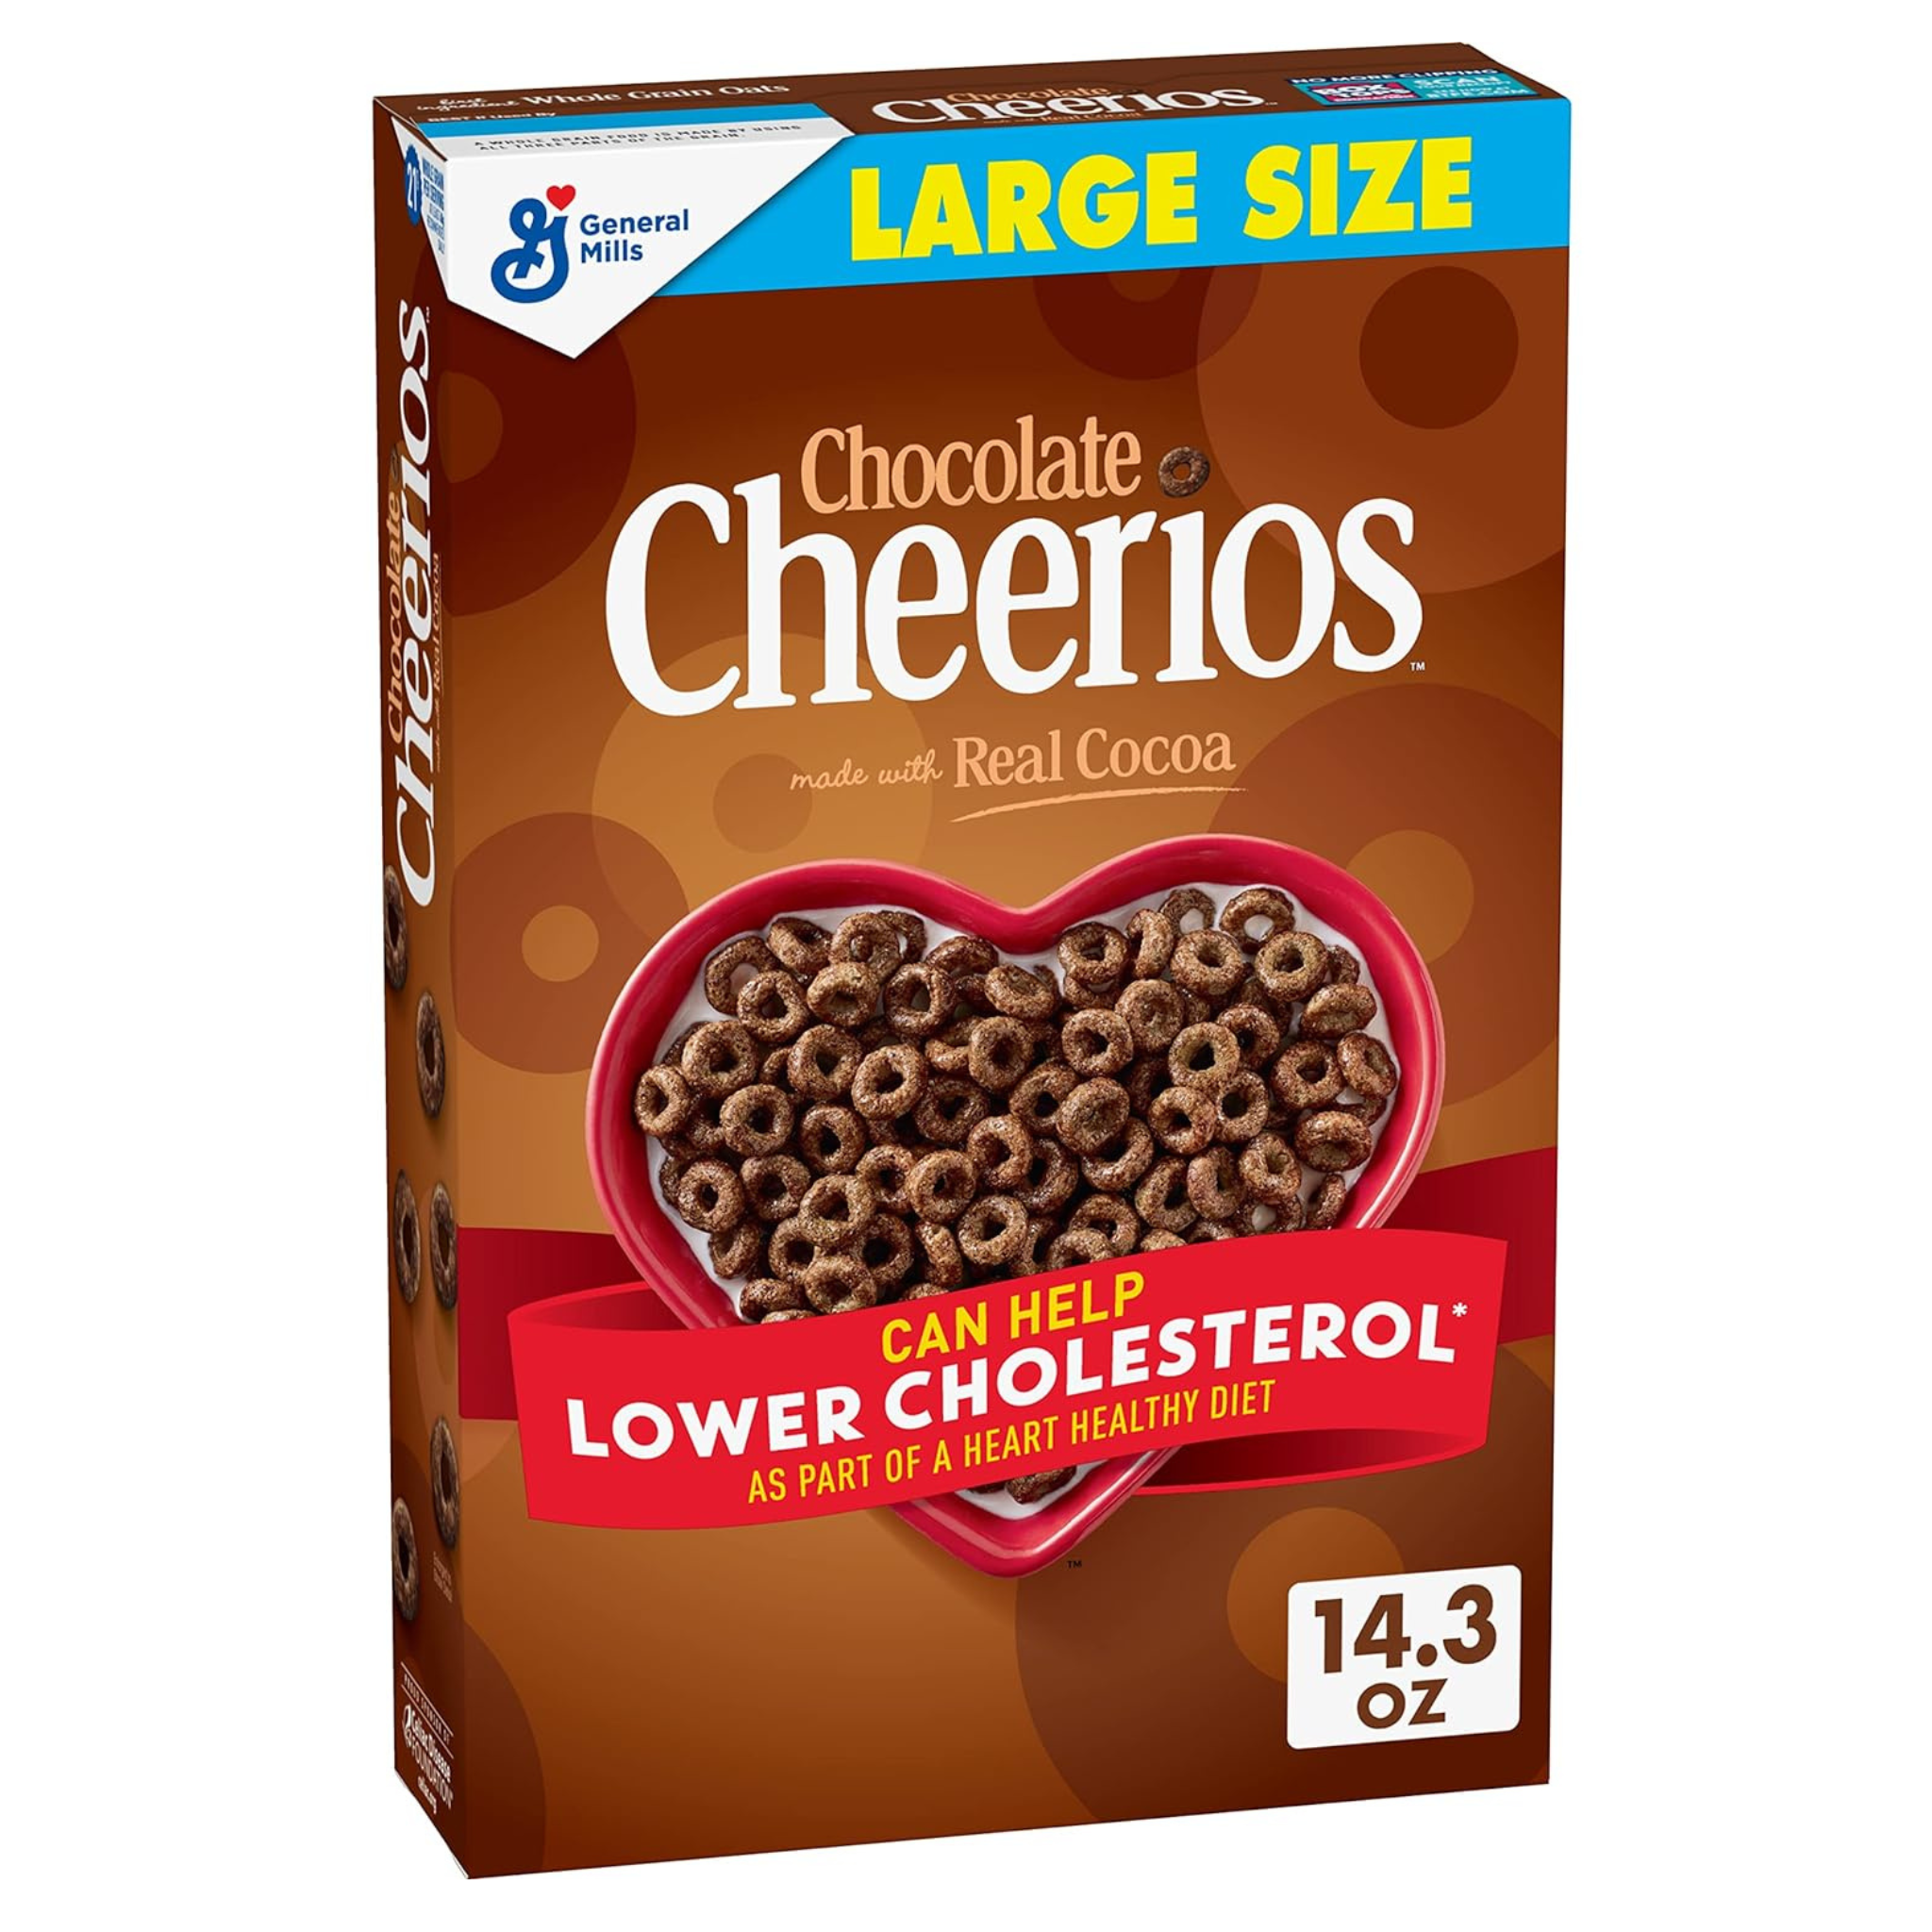 Chocolate Cheerios Cereal, Large Size, 14.3 oz Box